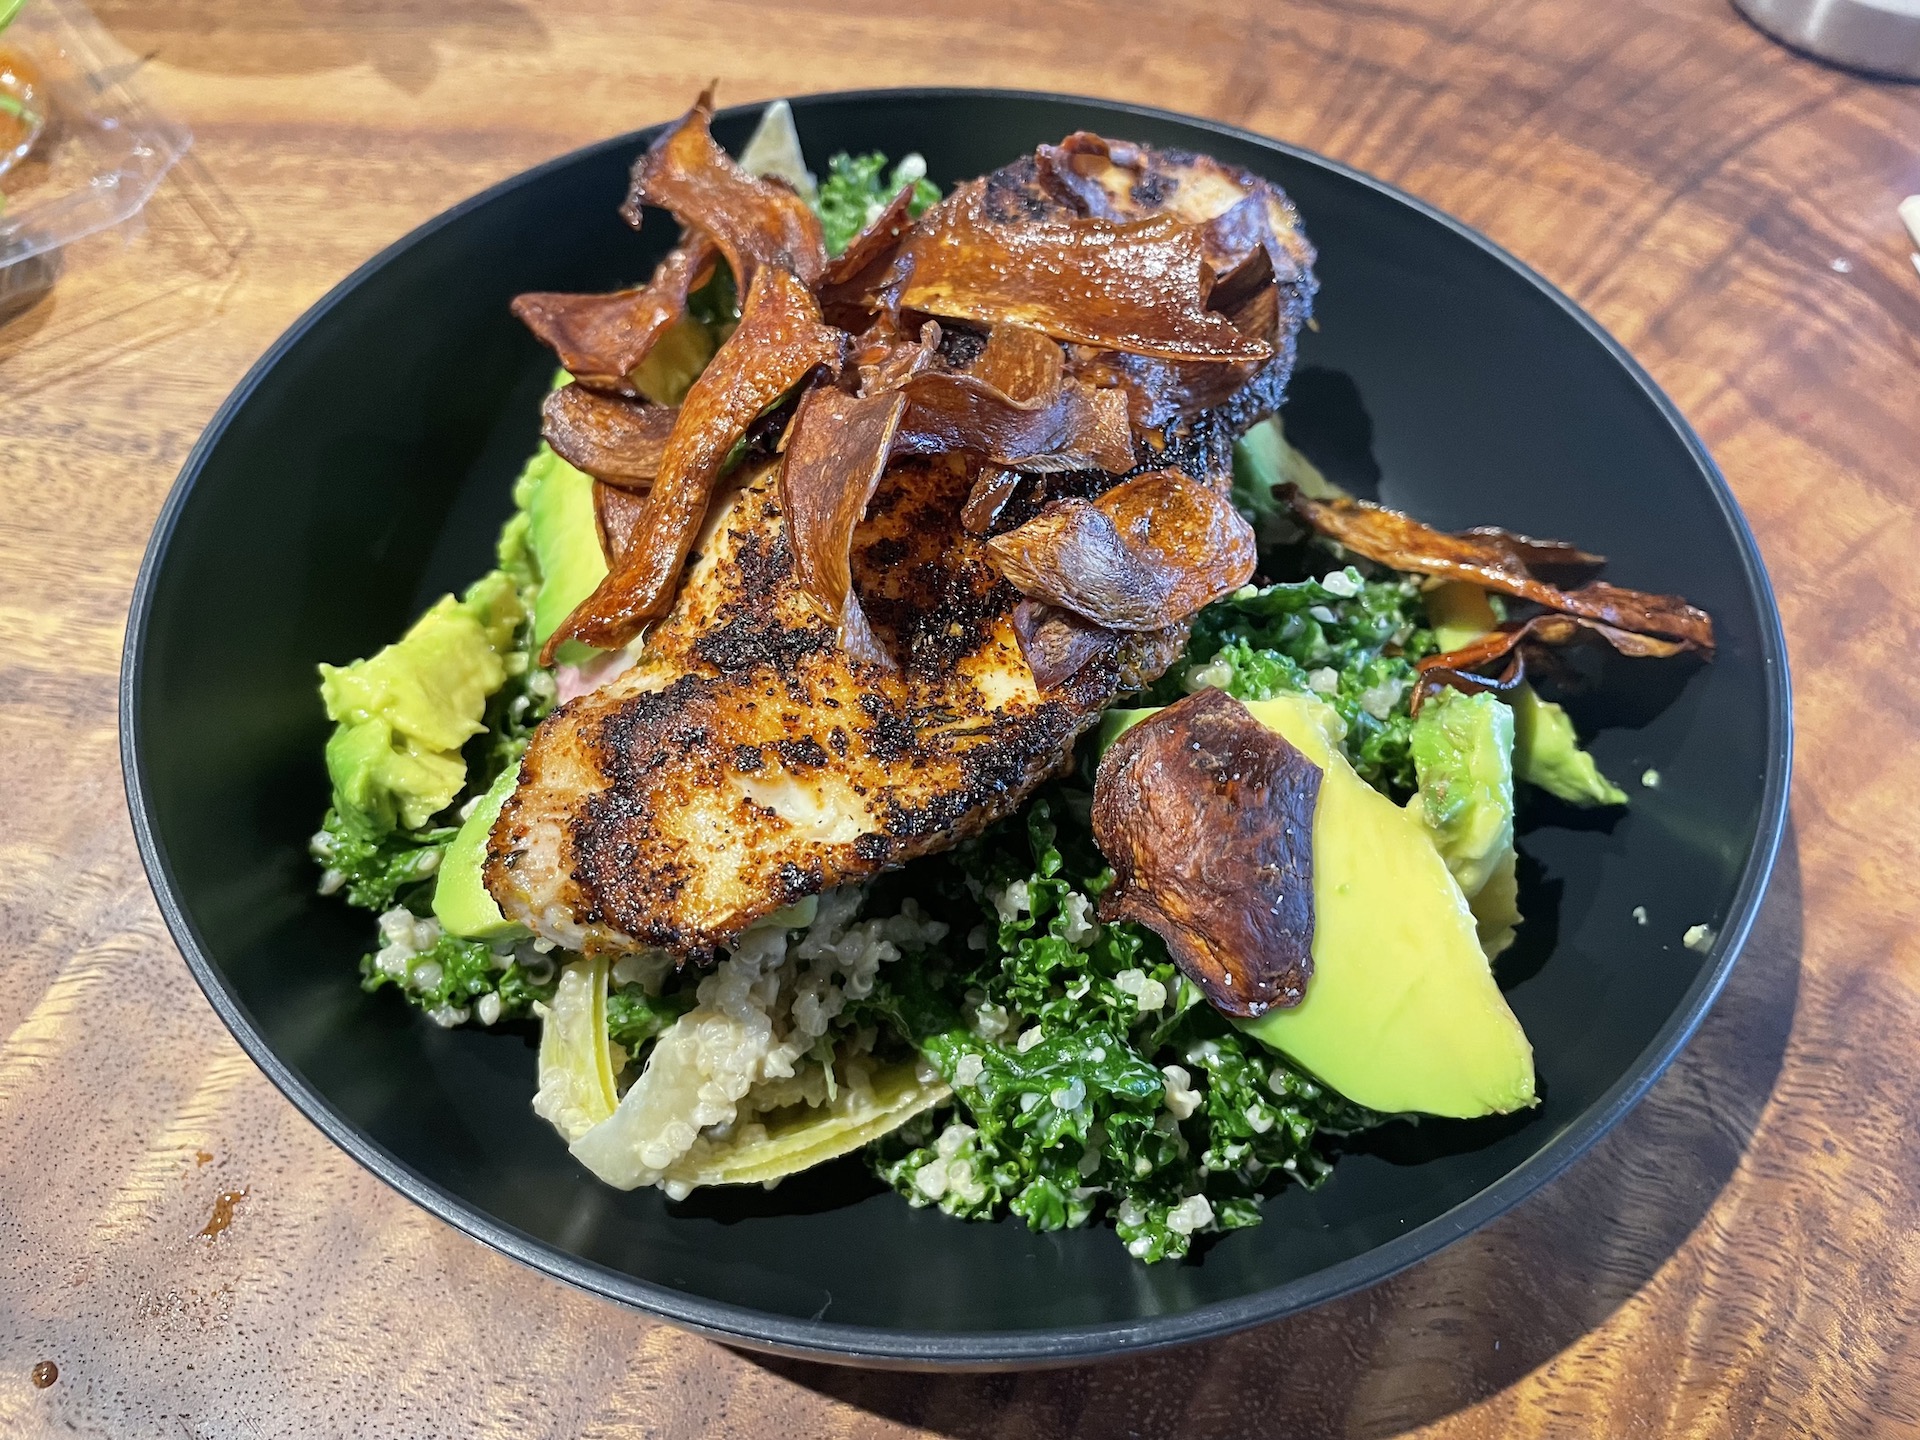 Tails Up Maui --- Fresh Catch over Kale and Quinoa Salad